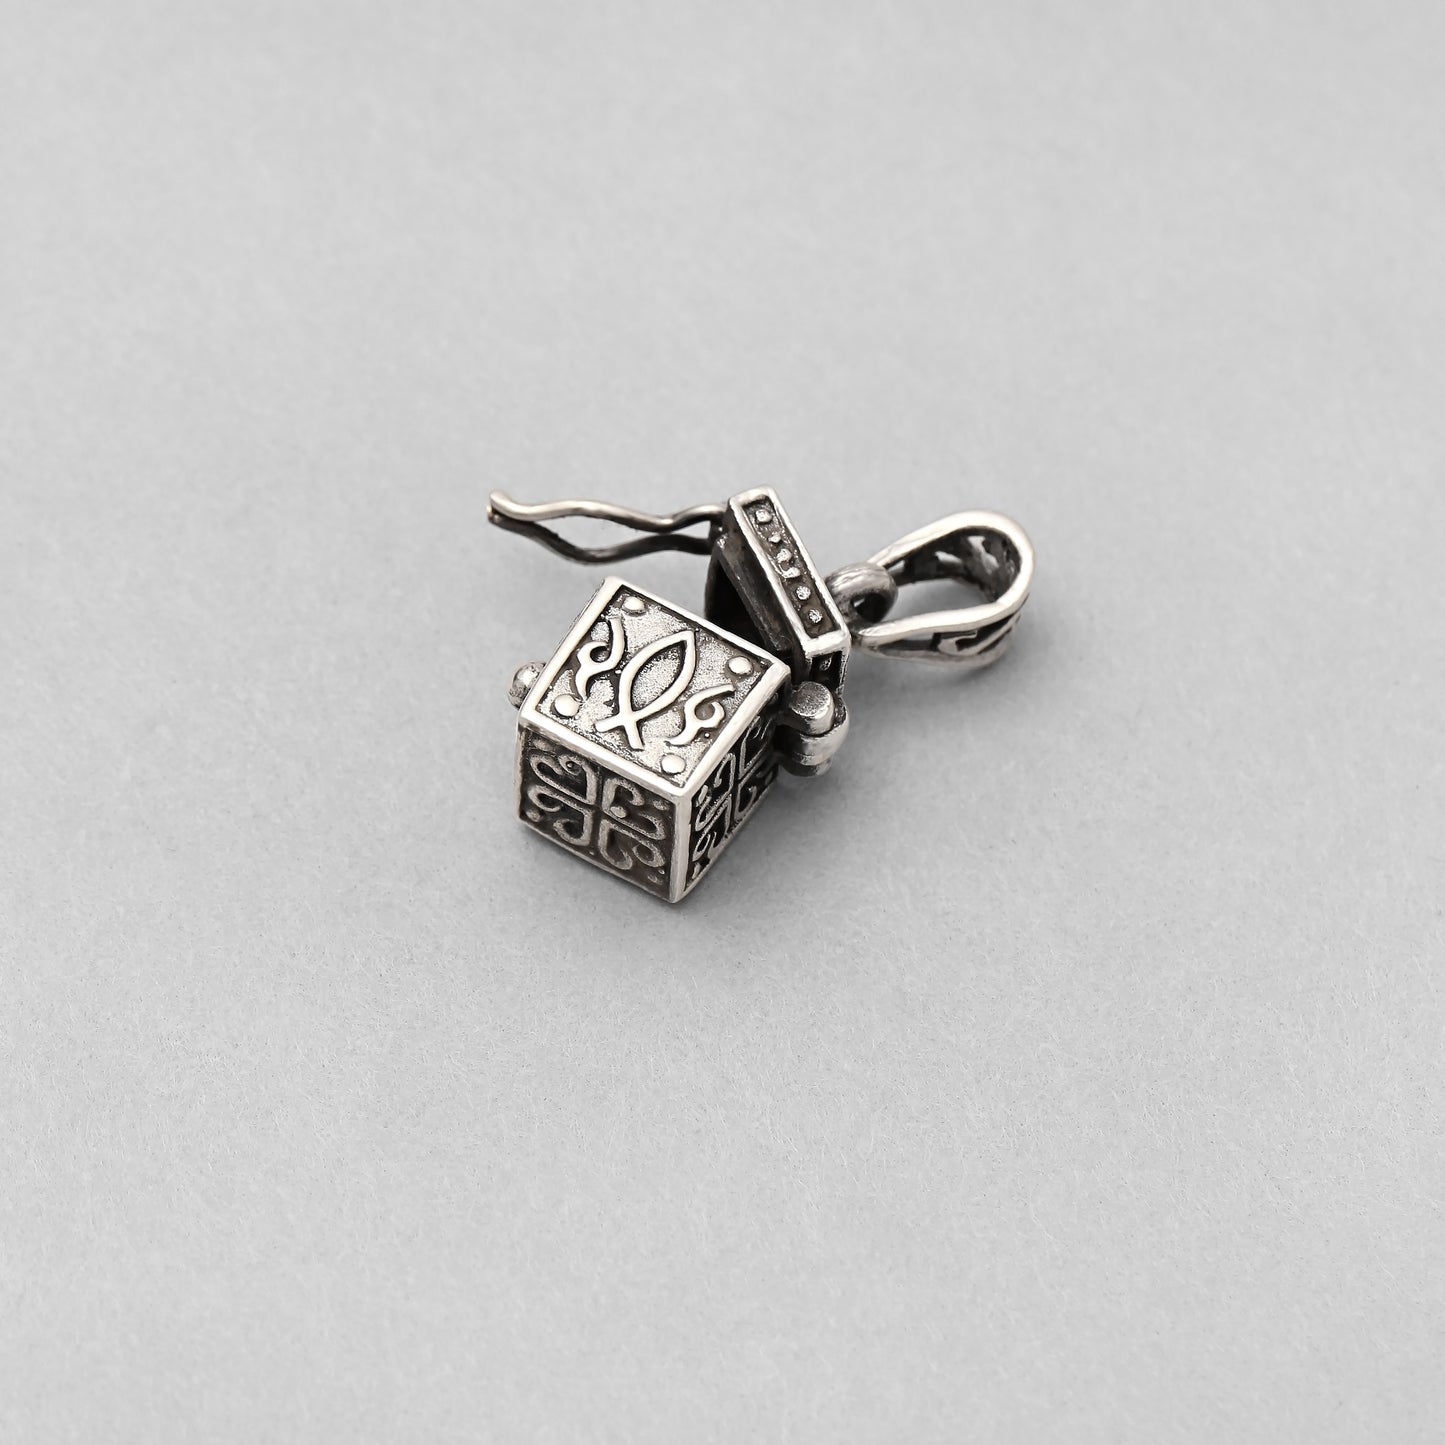 Unique 925 Sterling Silver Cube Box Shape Pendant Engraved with Beautiful Design